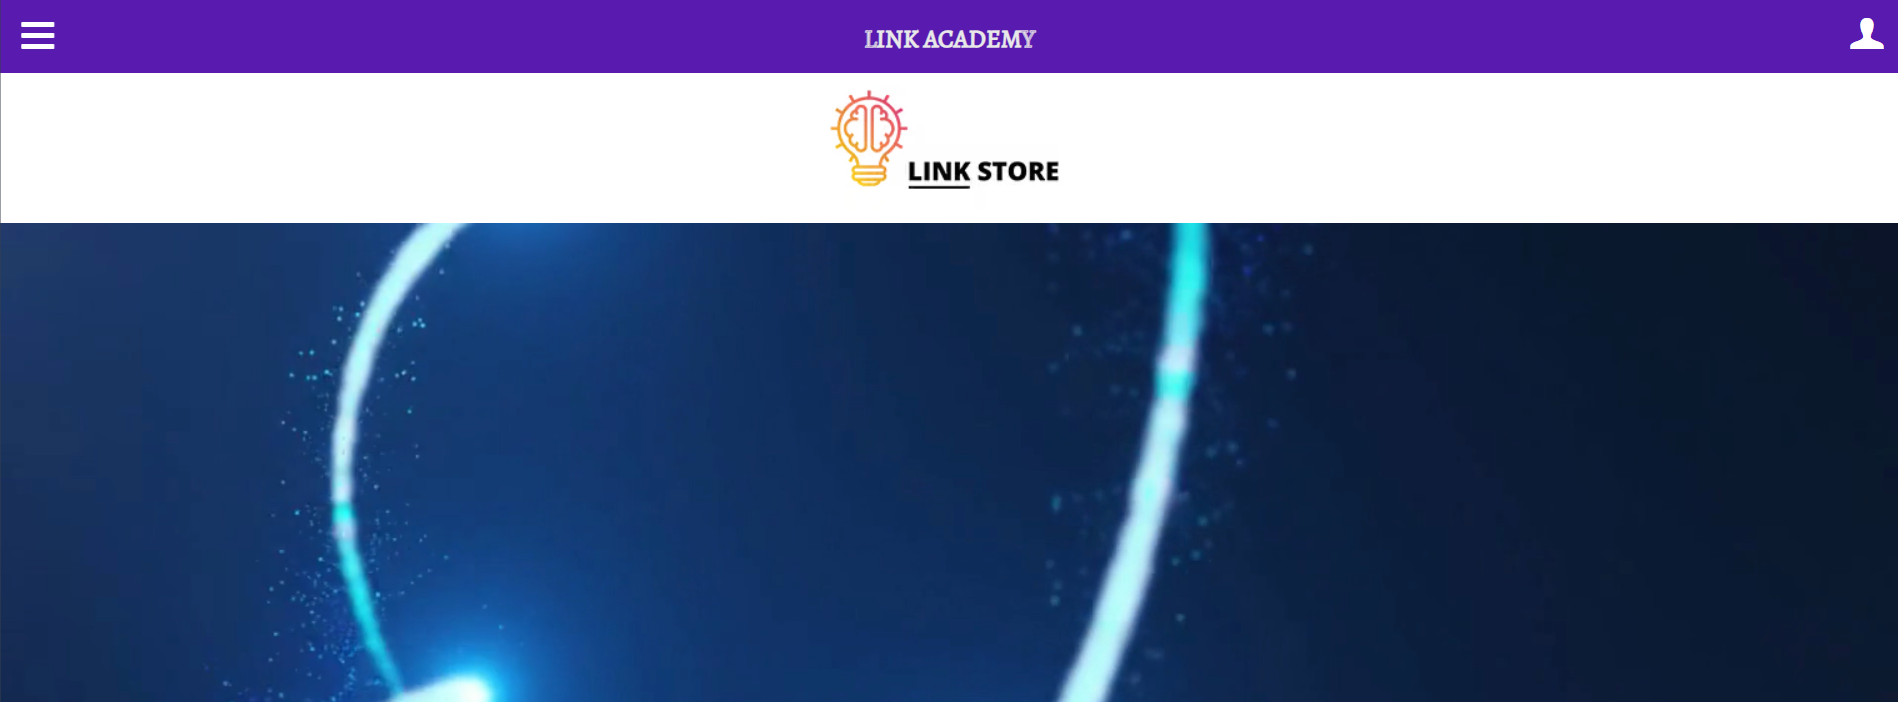 Learn Online at Link Academy